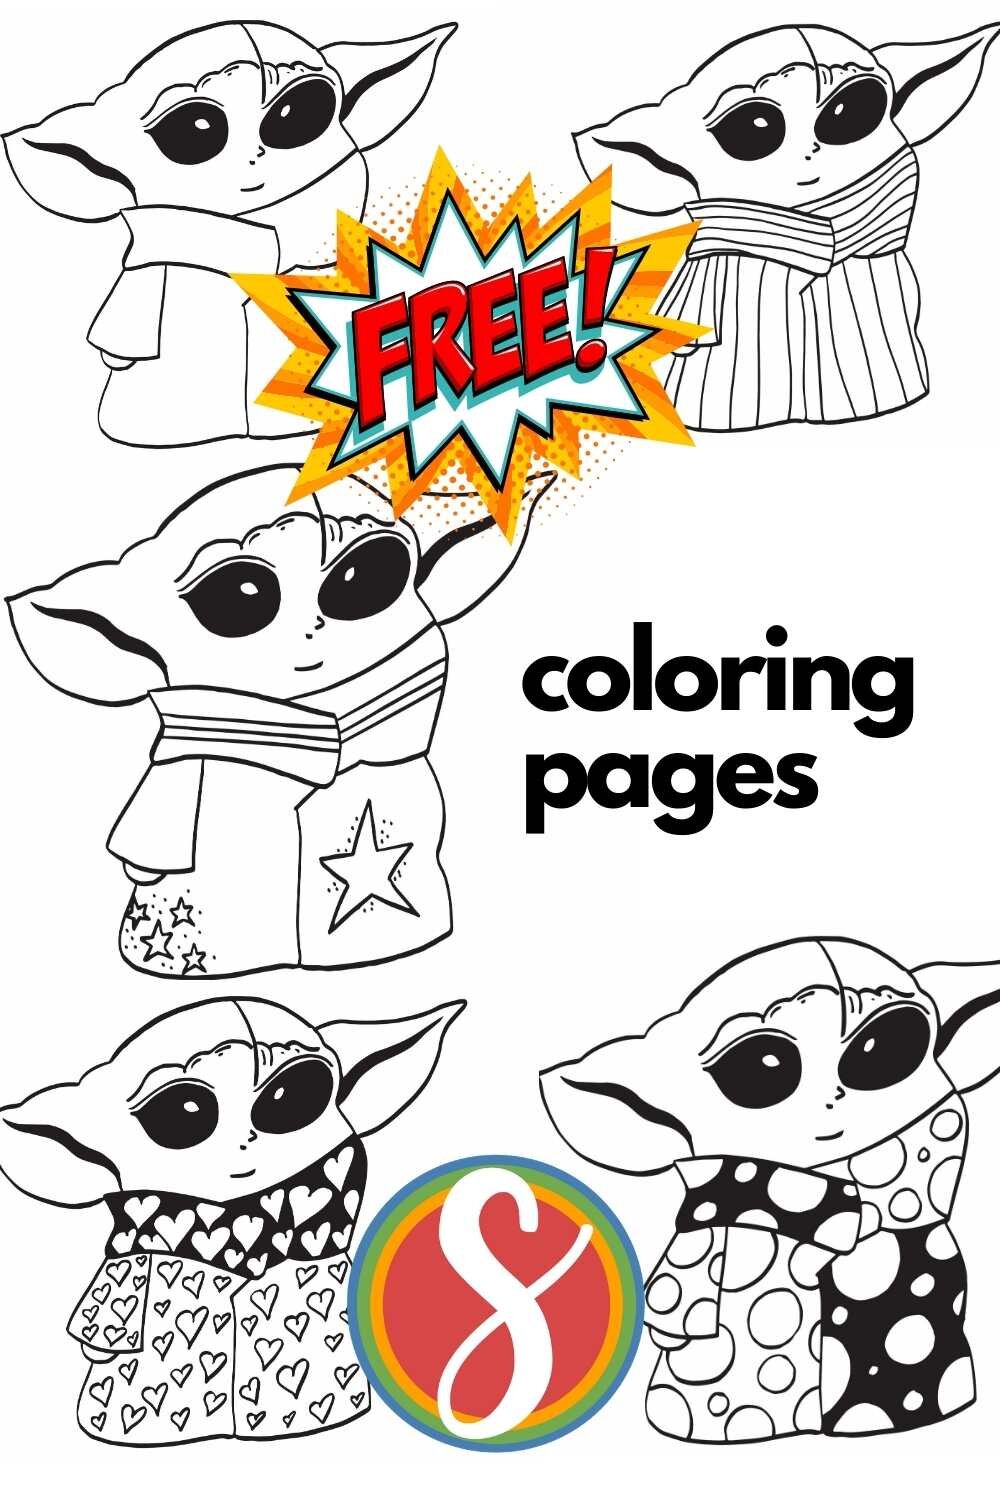 Free baby yoda coloring pages grogu â stevie doodles